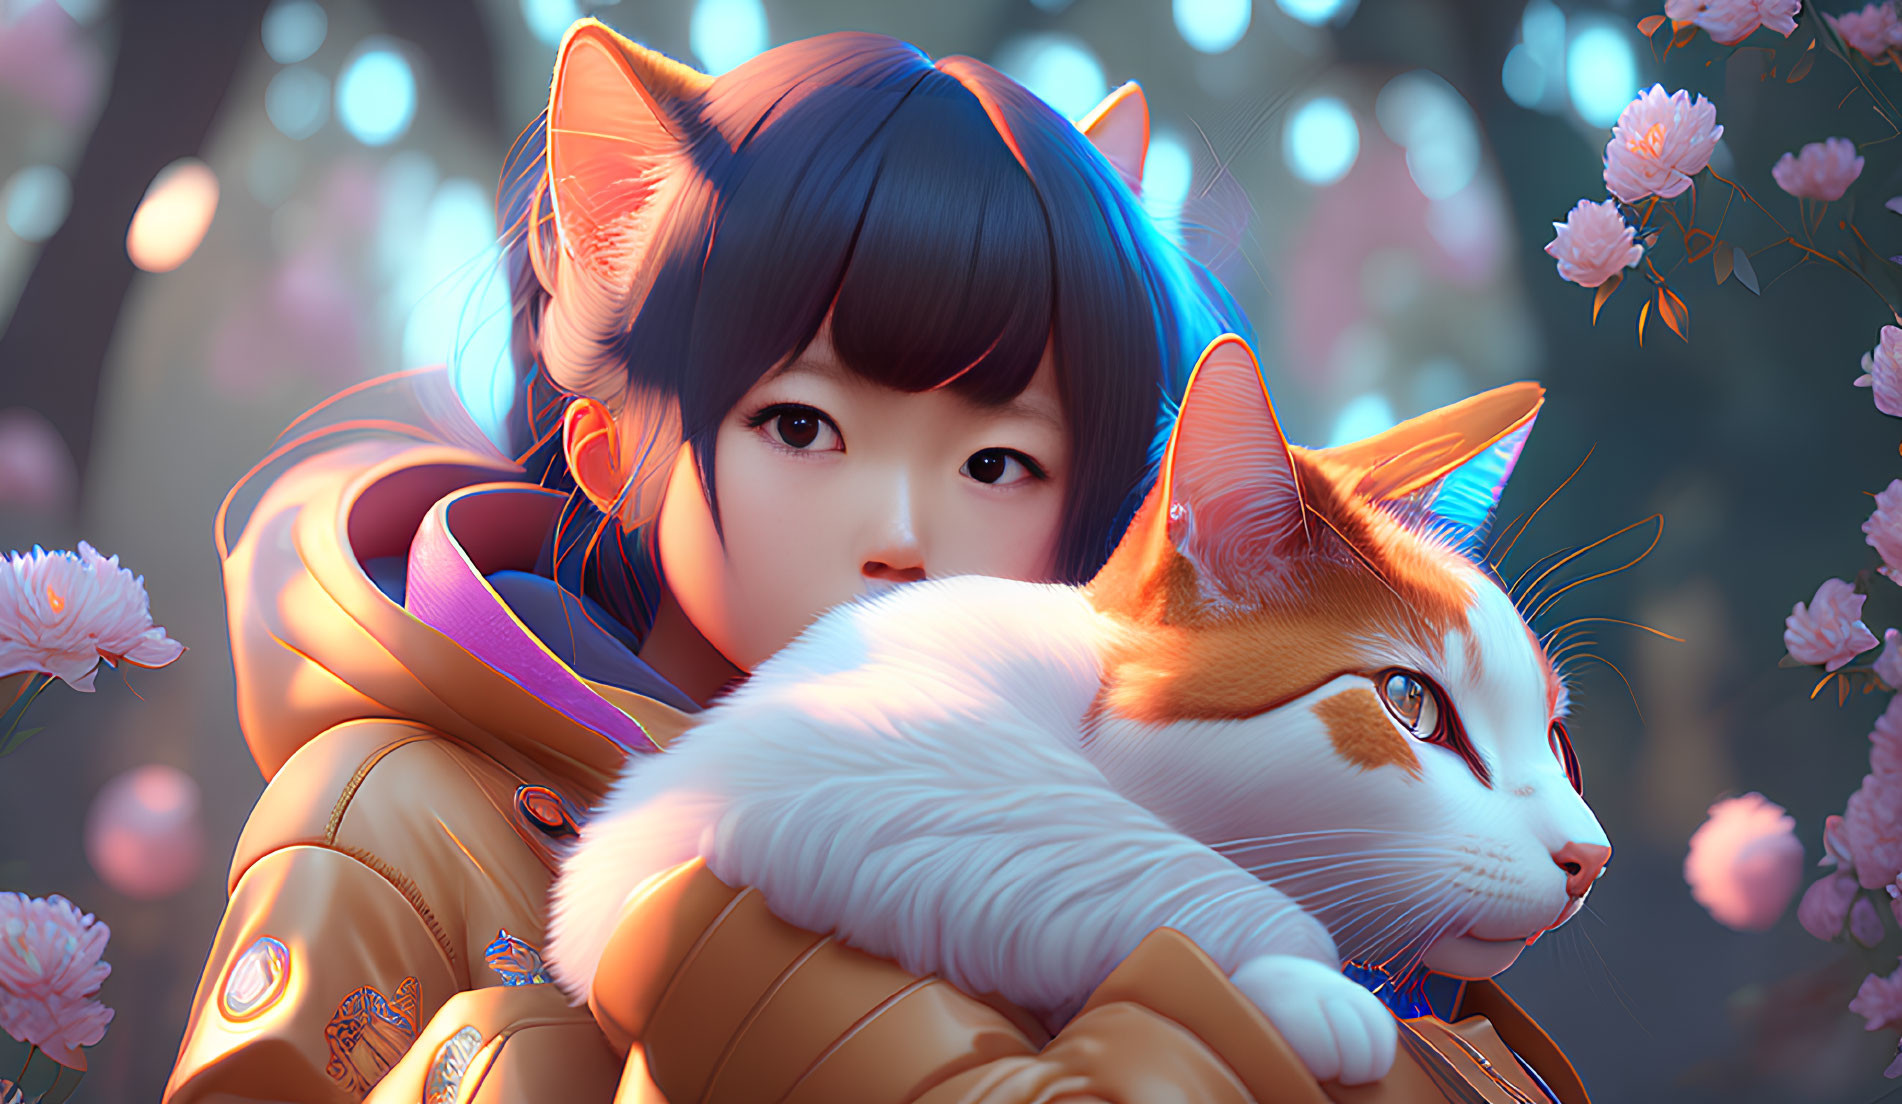 Blue Cat-Eared Girl with White and Orange Cat in Pink Blossom Setting